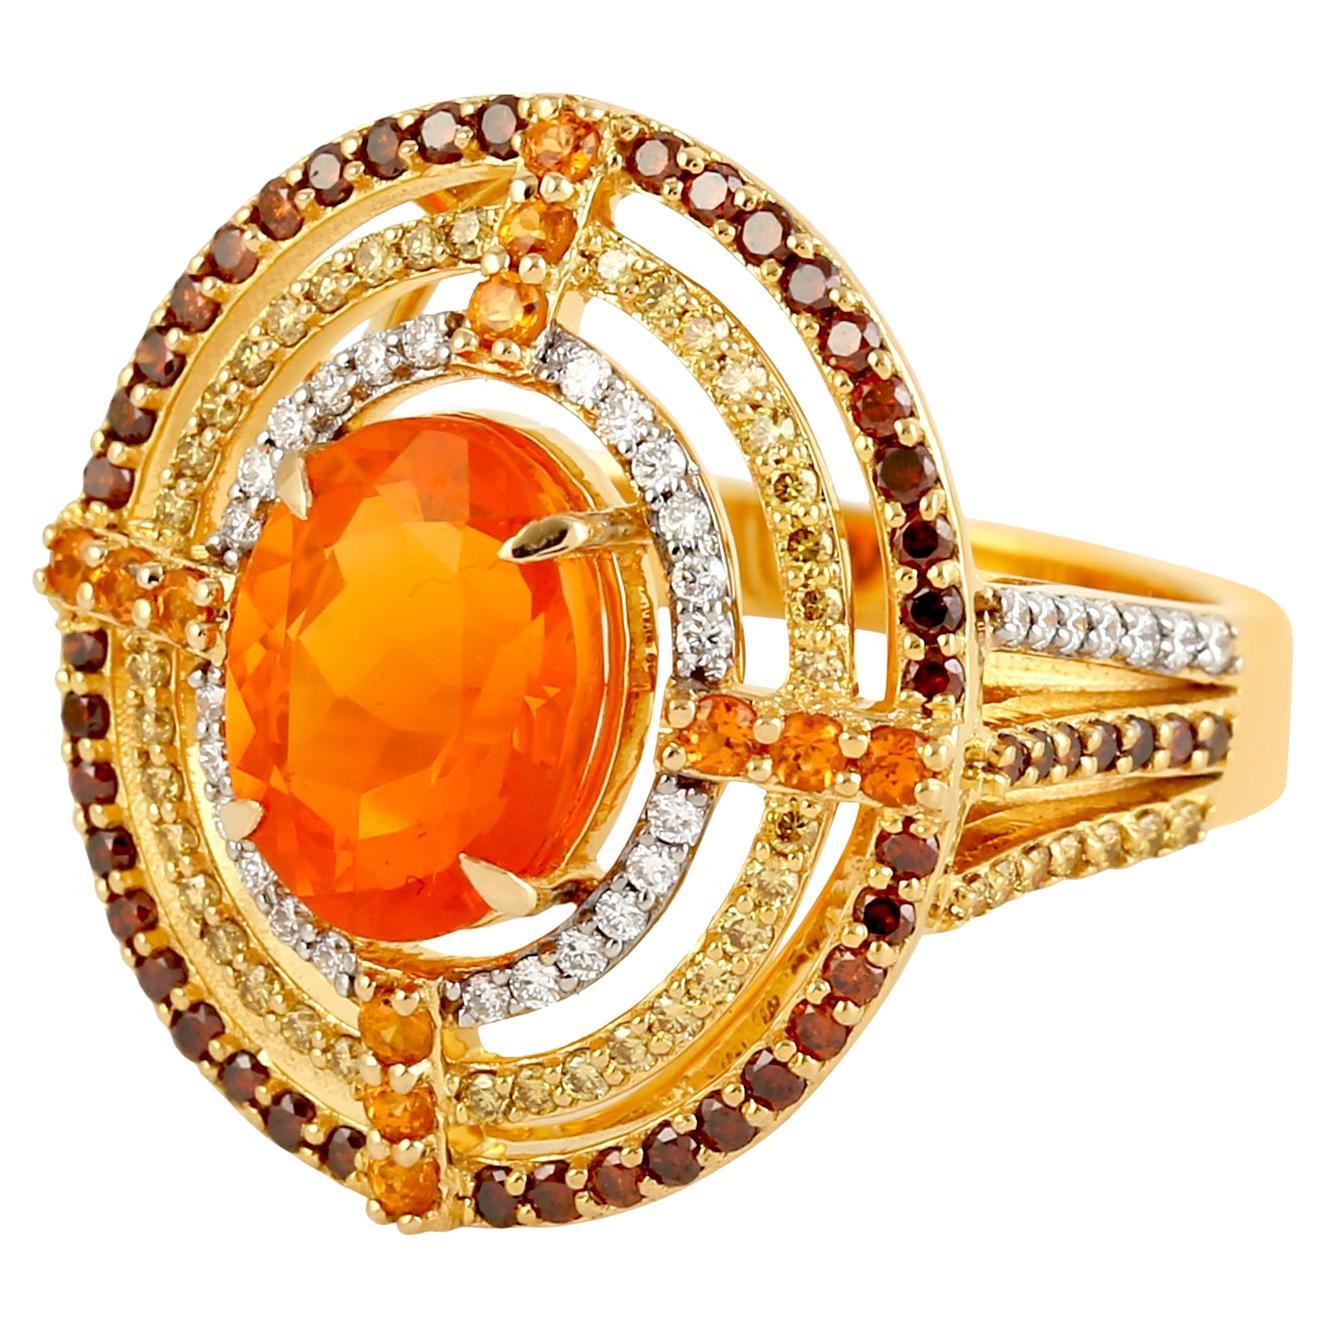 Fire Opal Cocktail Ring Surrounded By Mandarin Garnet & Diamonds In 18k Gold For Sale